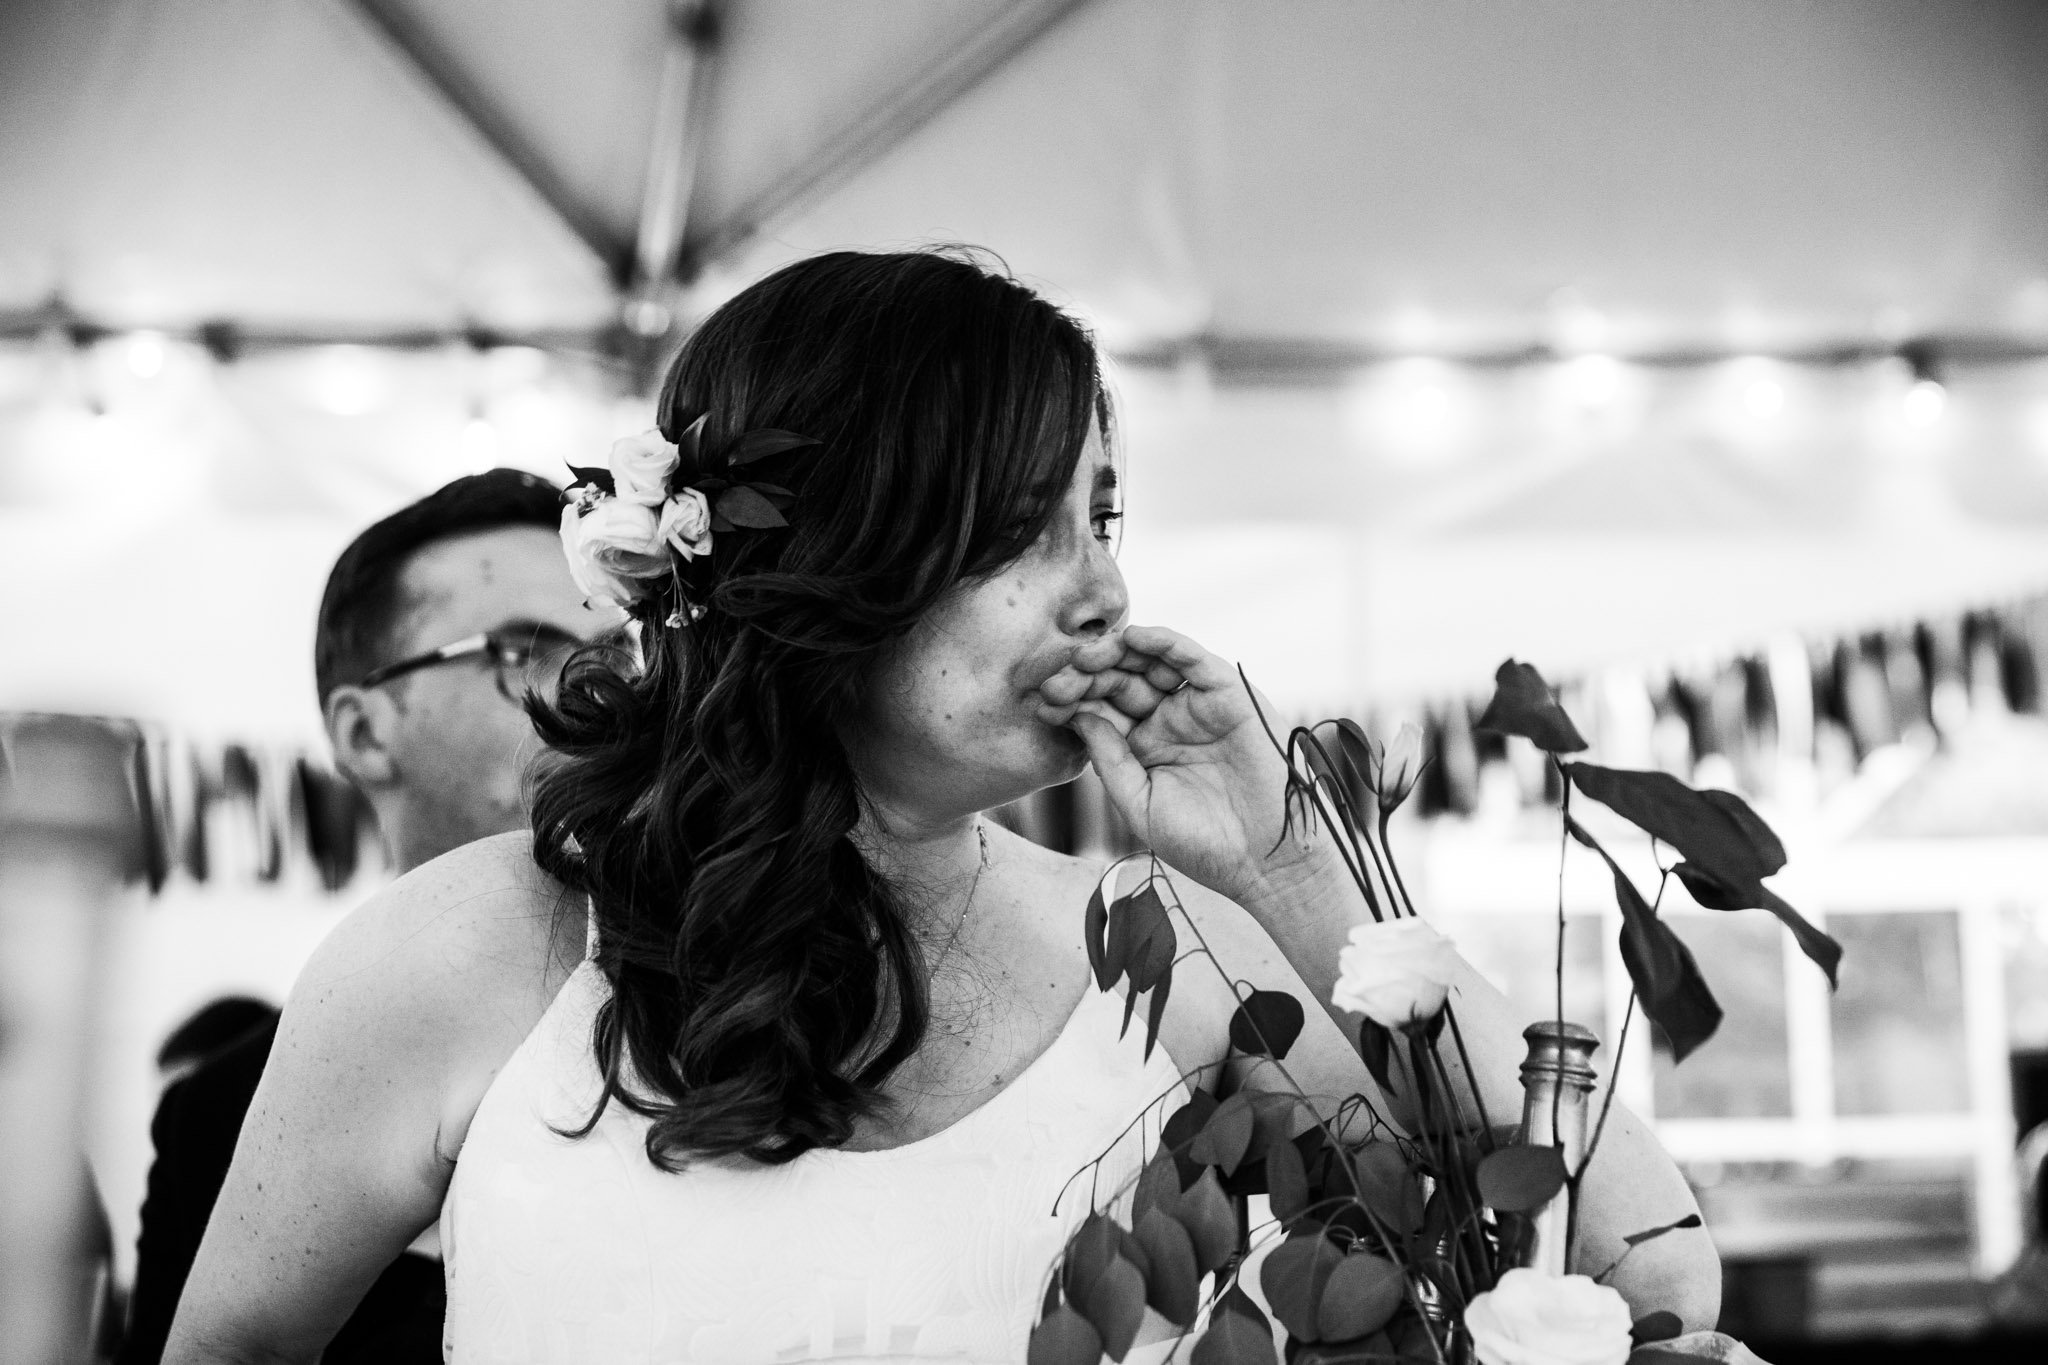 close up of bride with her hand covering her mouth - black and white wedding photography.jpg